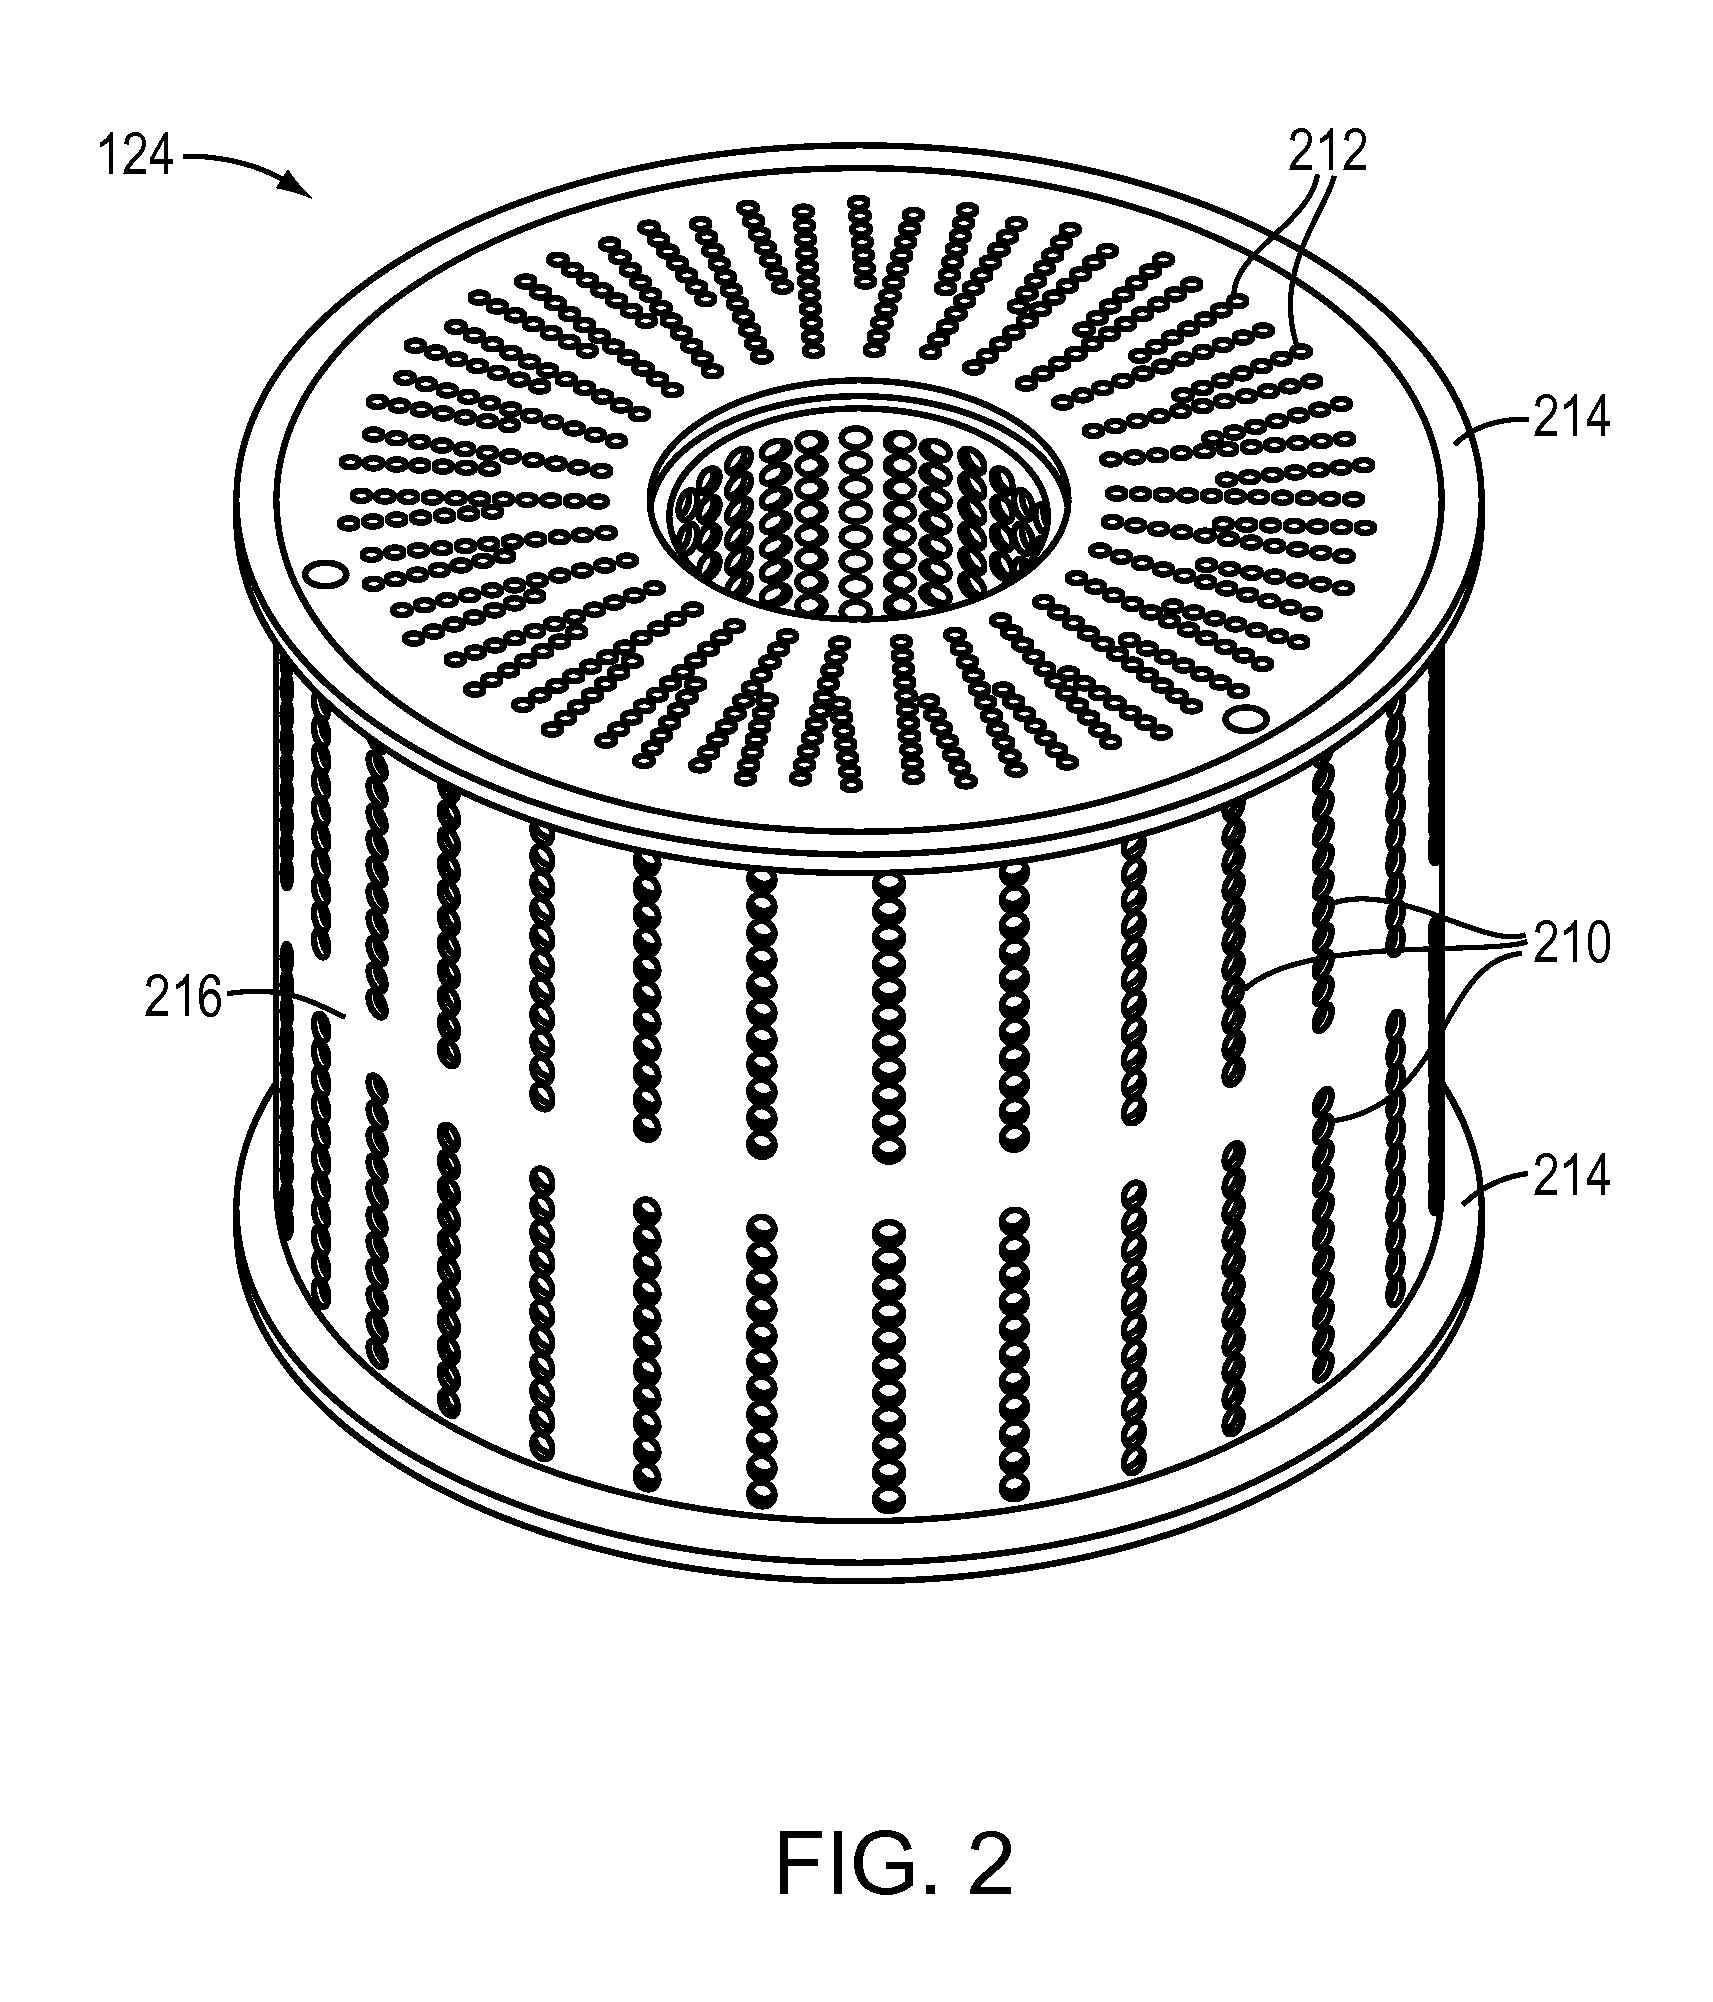 Apparatus and Methods for Conversion of Silicon Tetrachloride to Trichlorosilane